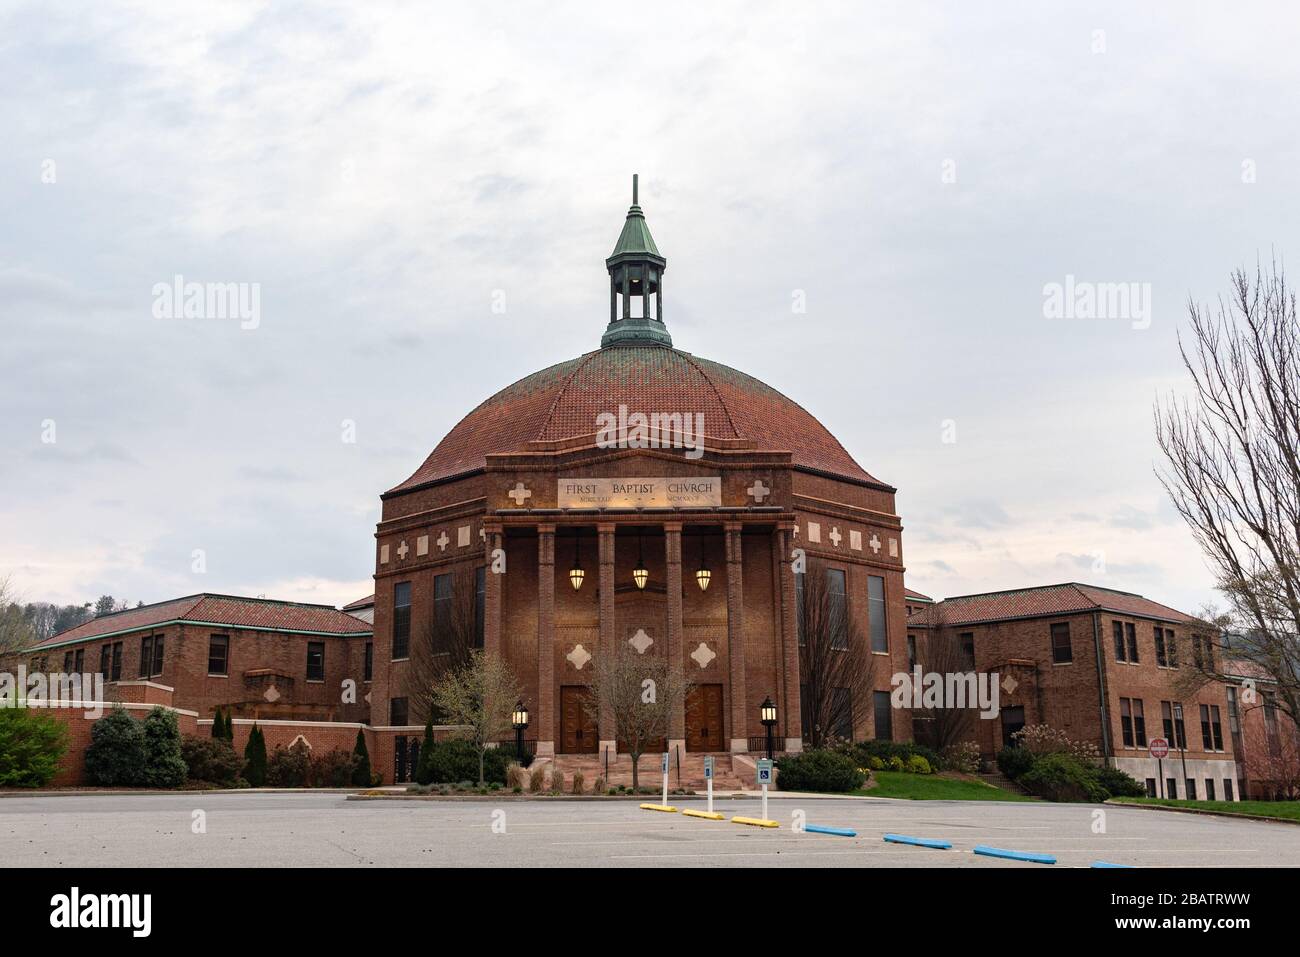 Asheville Usa 29th Mar 2020 The Iconic First Baptist Church Designed By Douglas Ellington Is Closed During The Coronavirus Stay At Home Order In Asheville Nc Usa Credit Gloria Goodalamy Live News 2BATRWW 